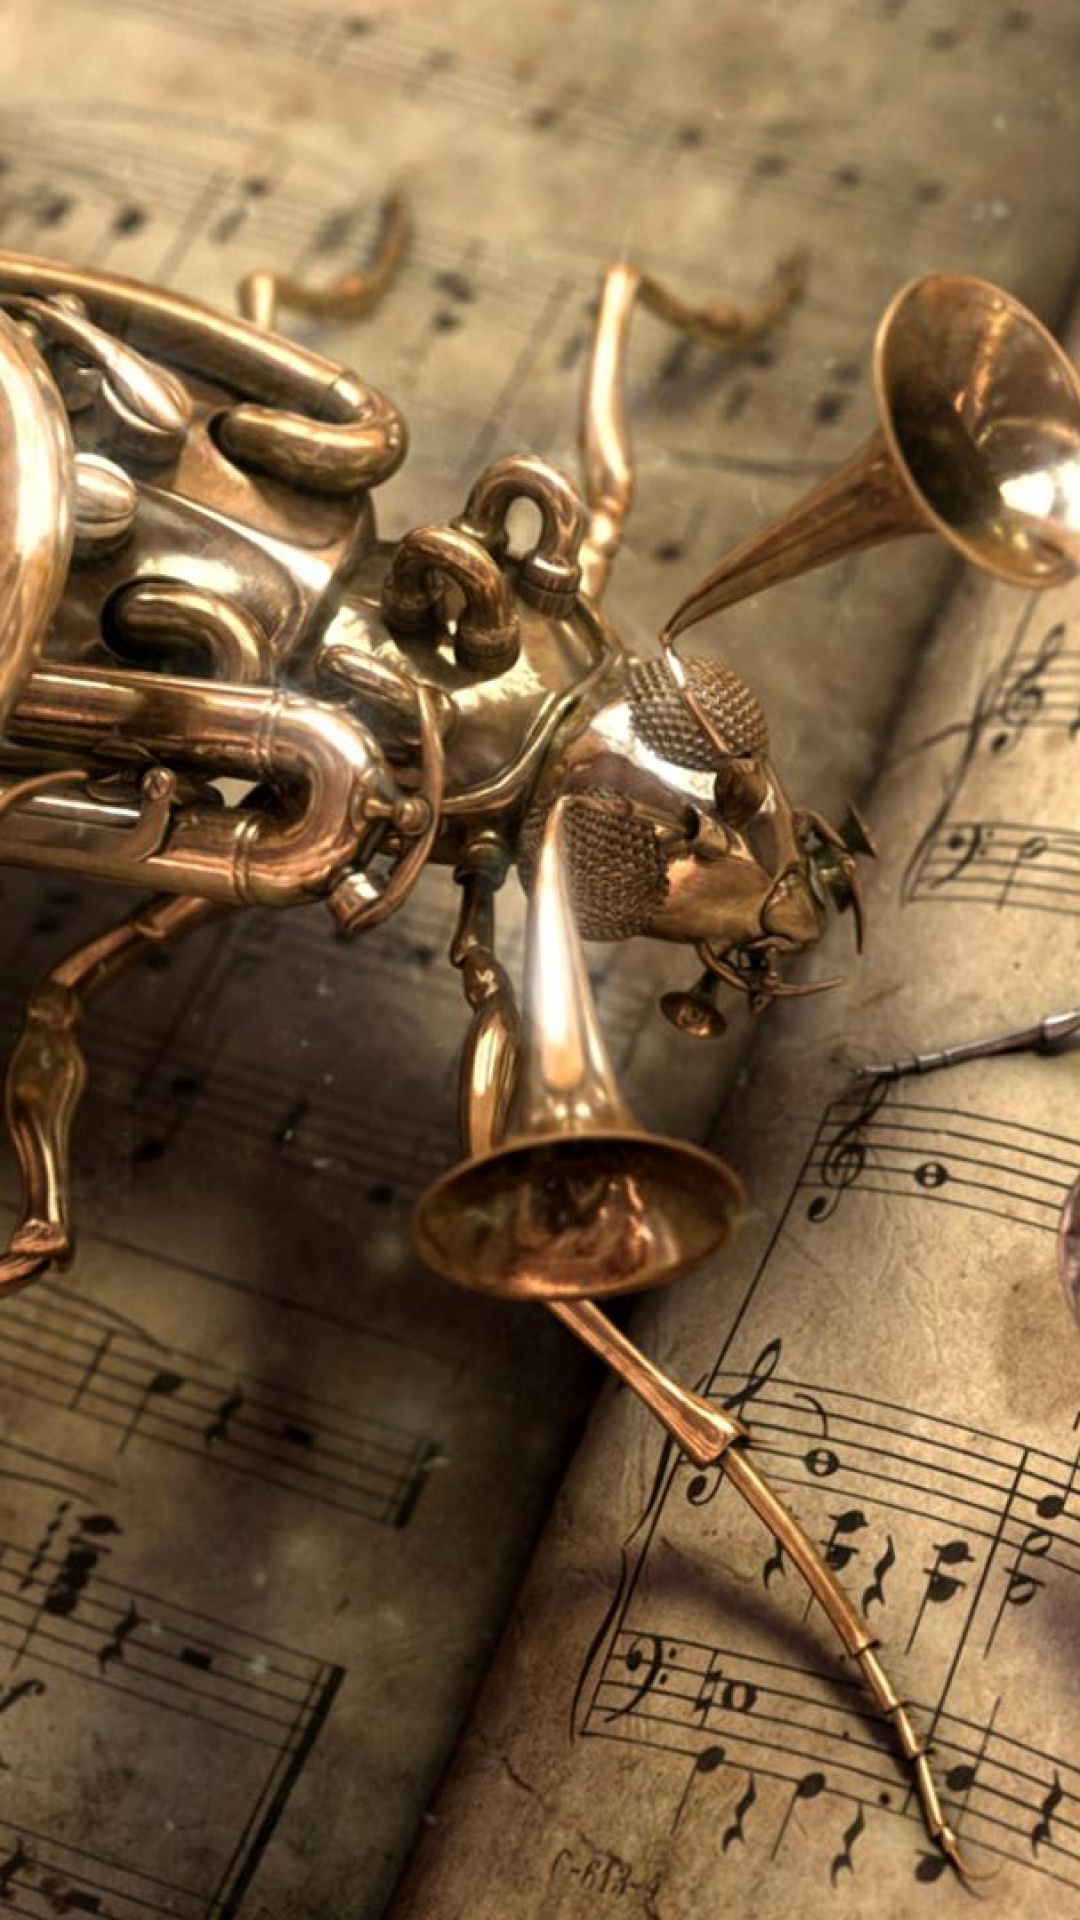 Musical Bug Steampunk Android Wallpaper free download